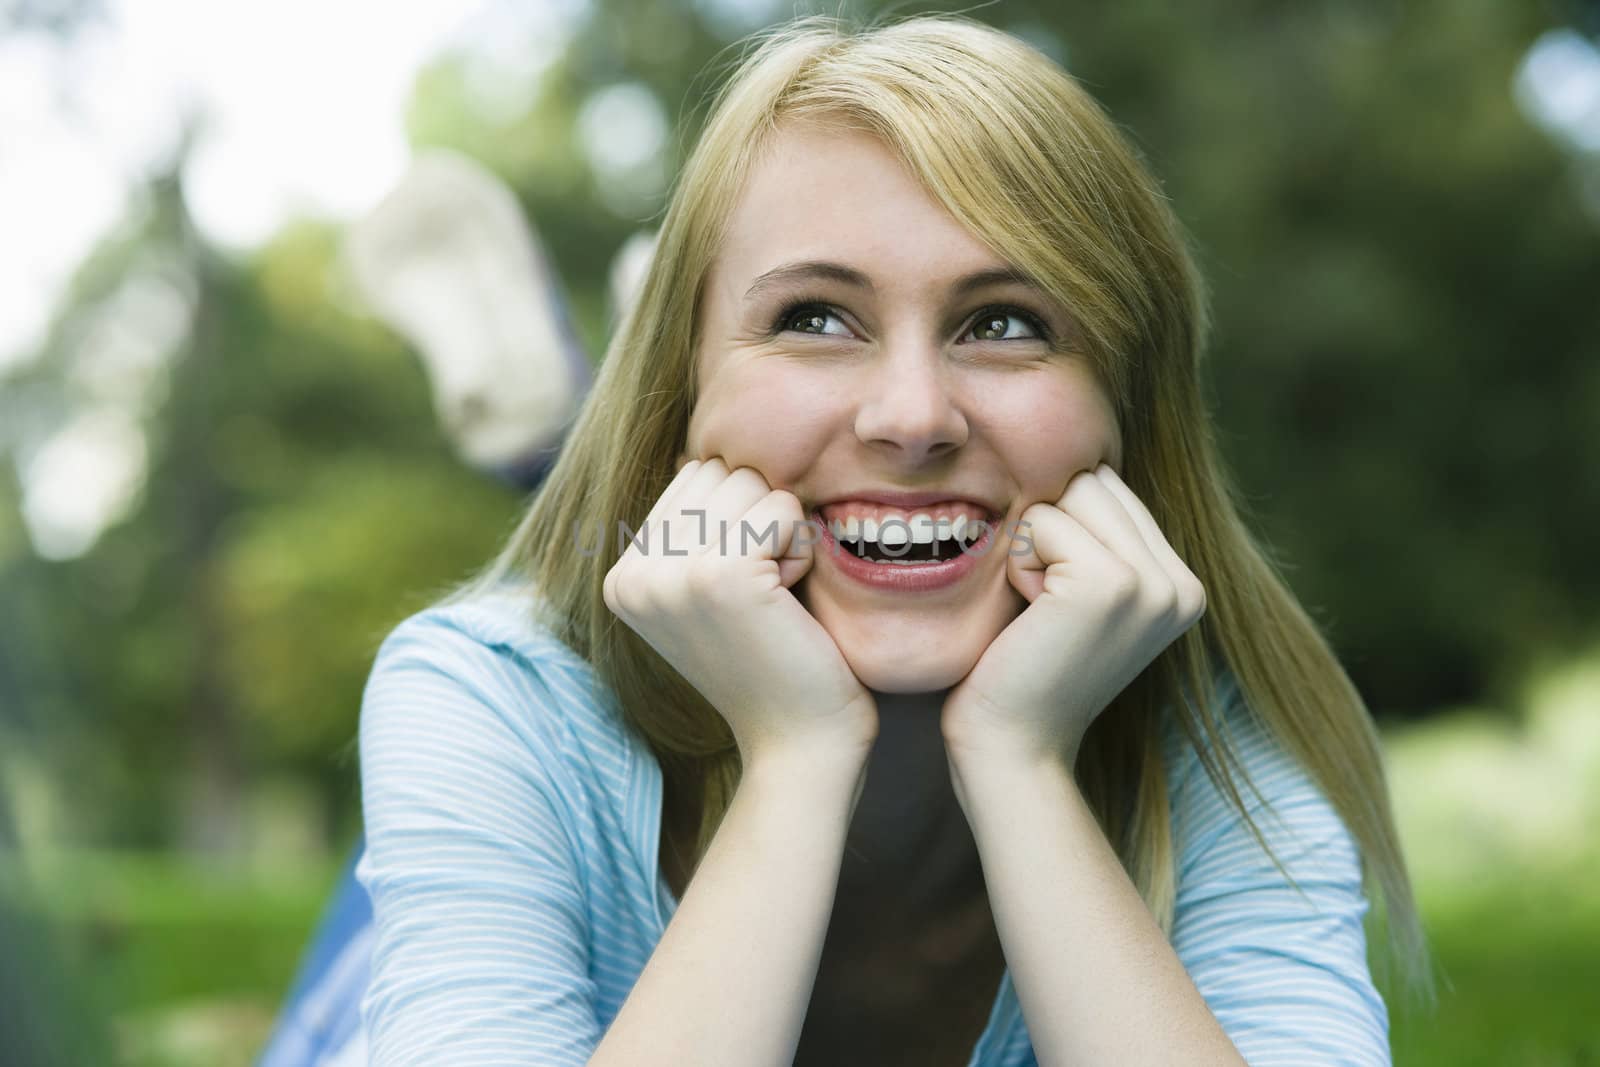 Smiling Teen Girl in Park Looking Away From Camera